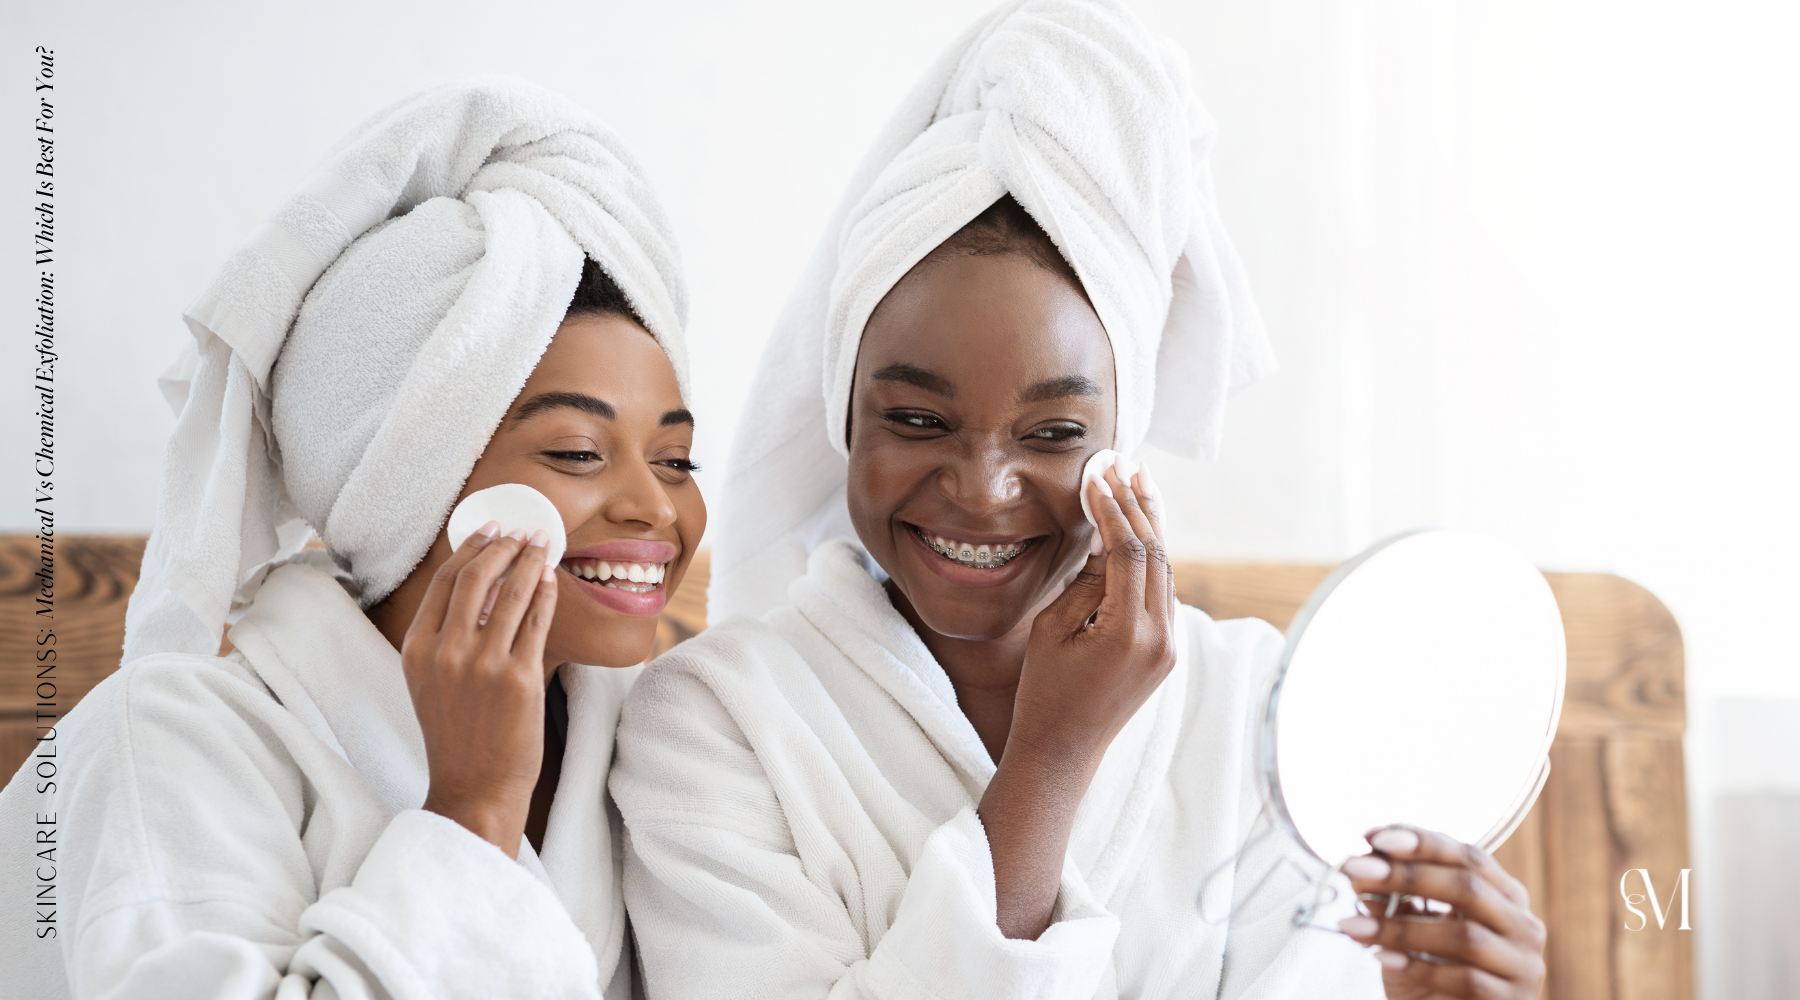 Chemical exfoliation is best for sensitive skin. 